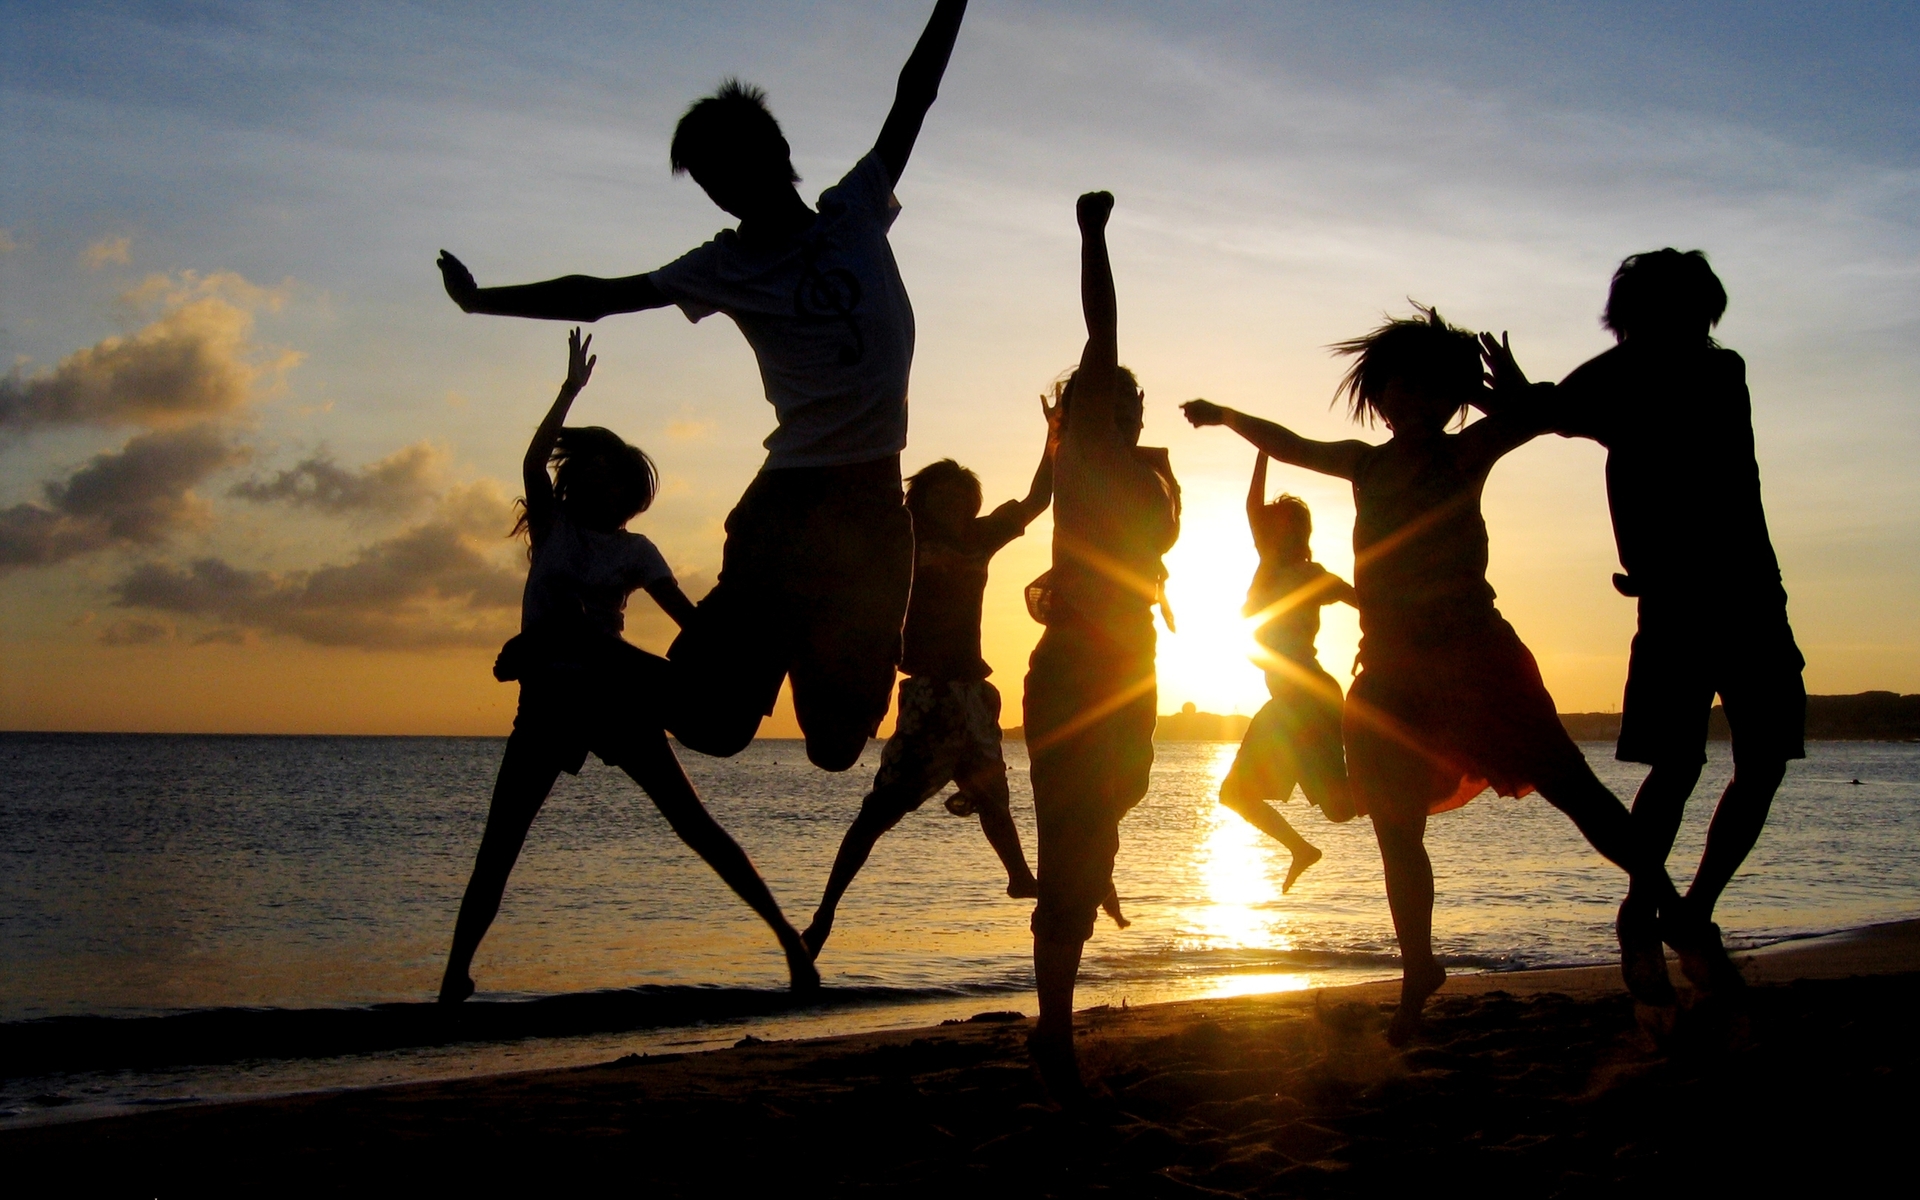 friends forever hd wallpapers,people on beach,people in nature,fun,friendship,happy